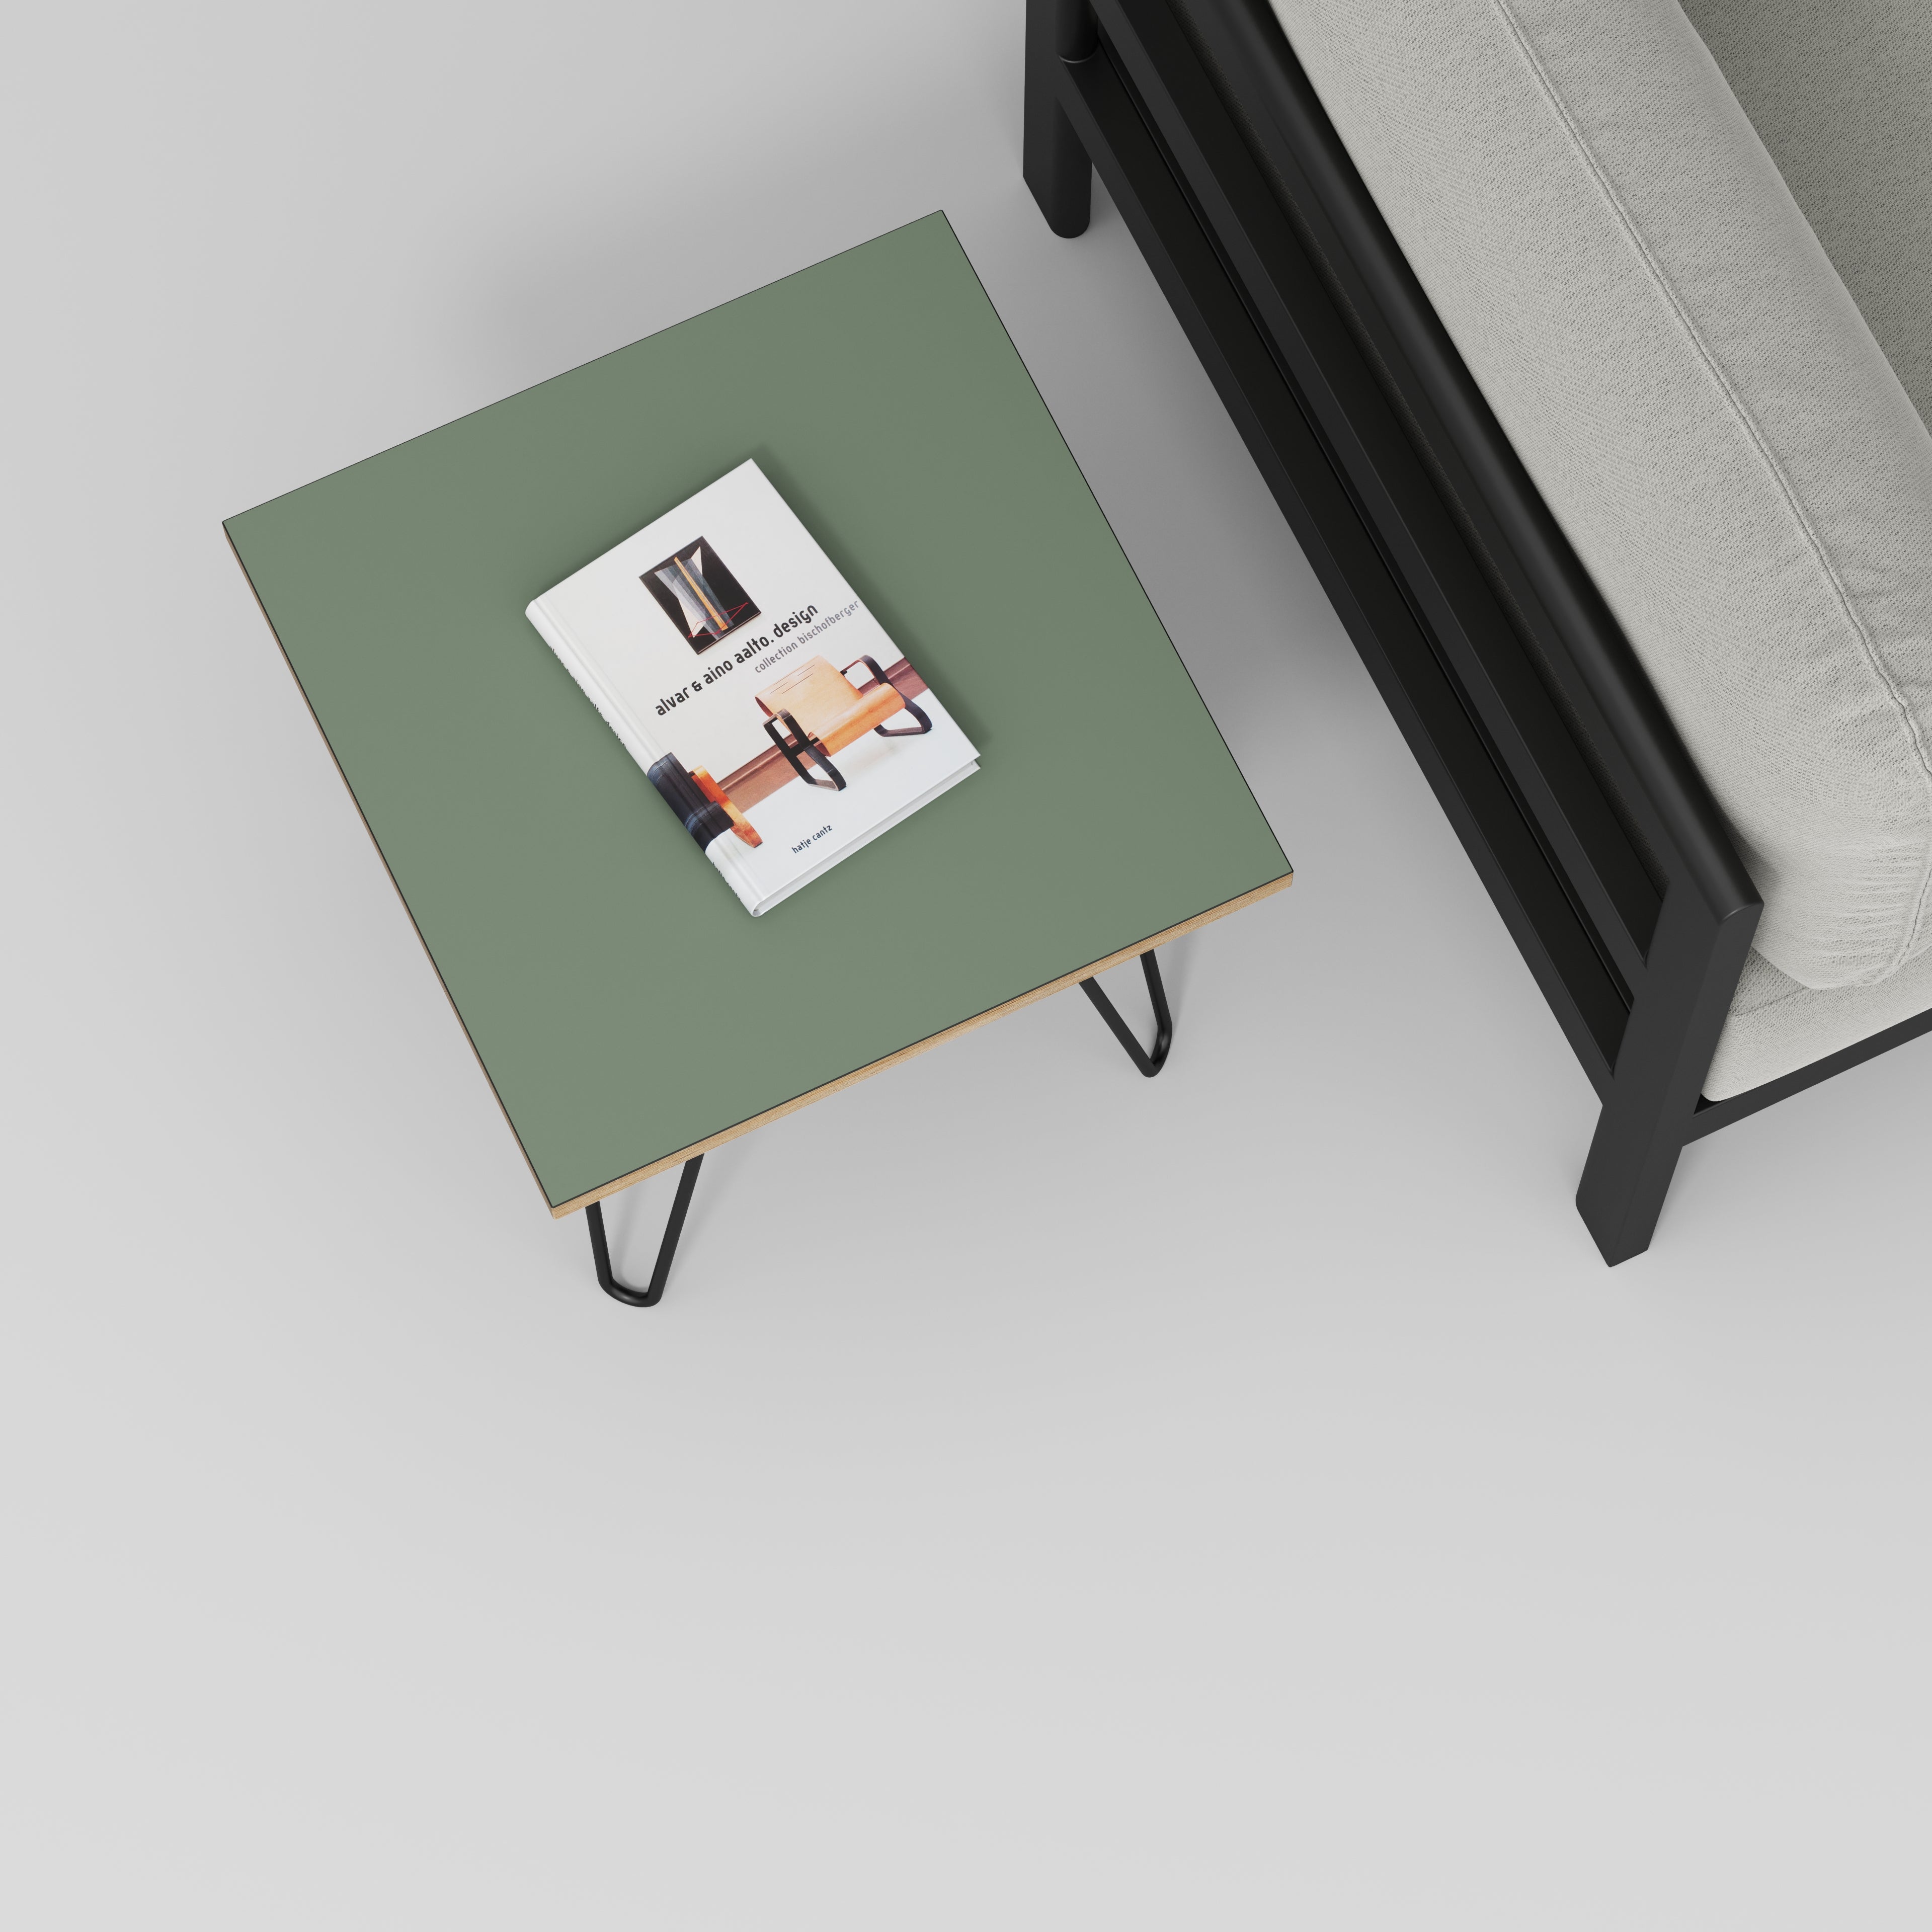 Side Table with Black Hairpin Legs - Formica Green Slate - 500(w) x 500(d) x 425(h)